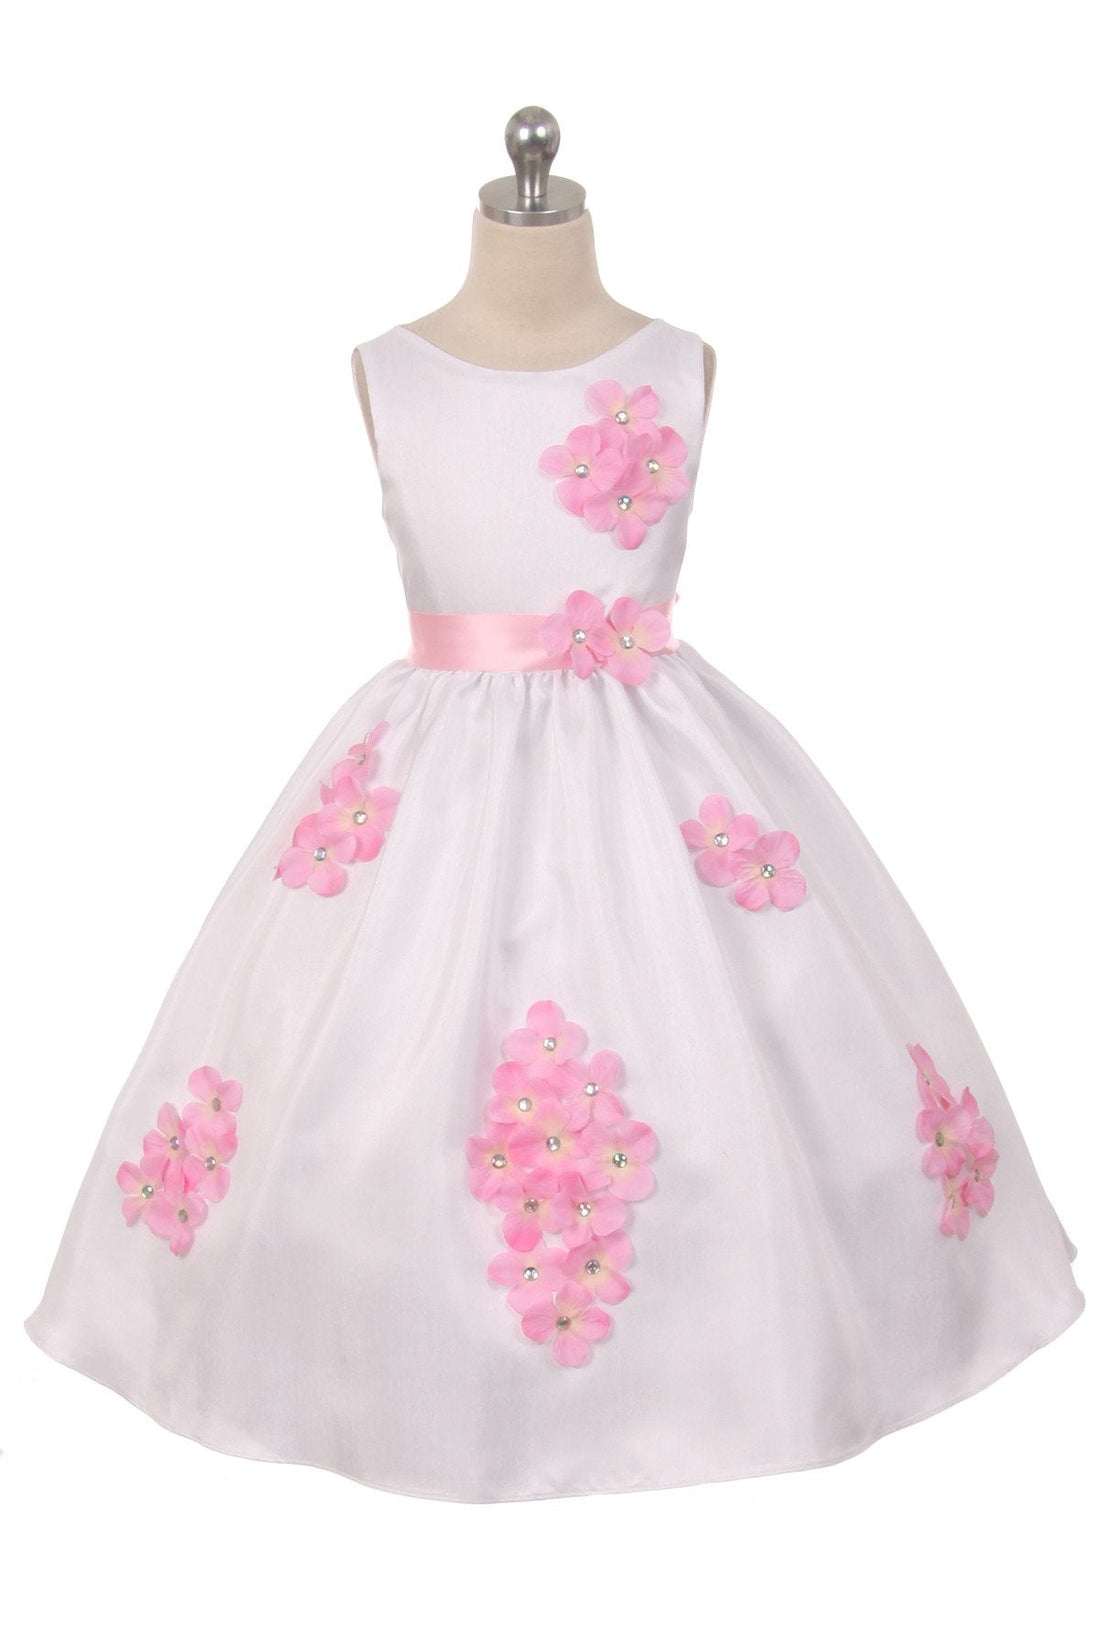 Shantung Decorated with Flower Petals Girl Party Dress by AS204F Kids Dream - Girl Formal Dresses